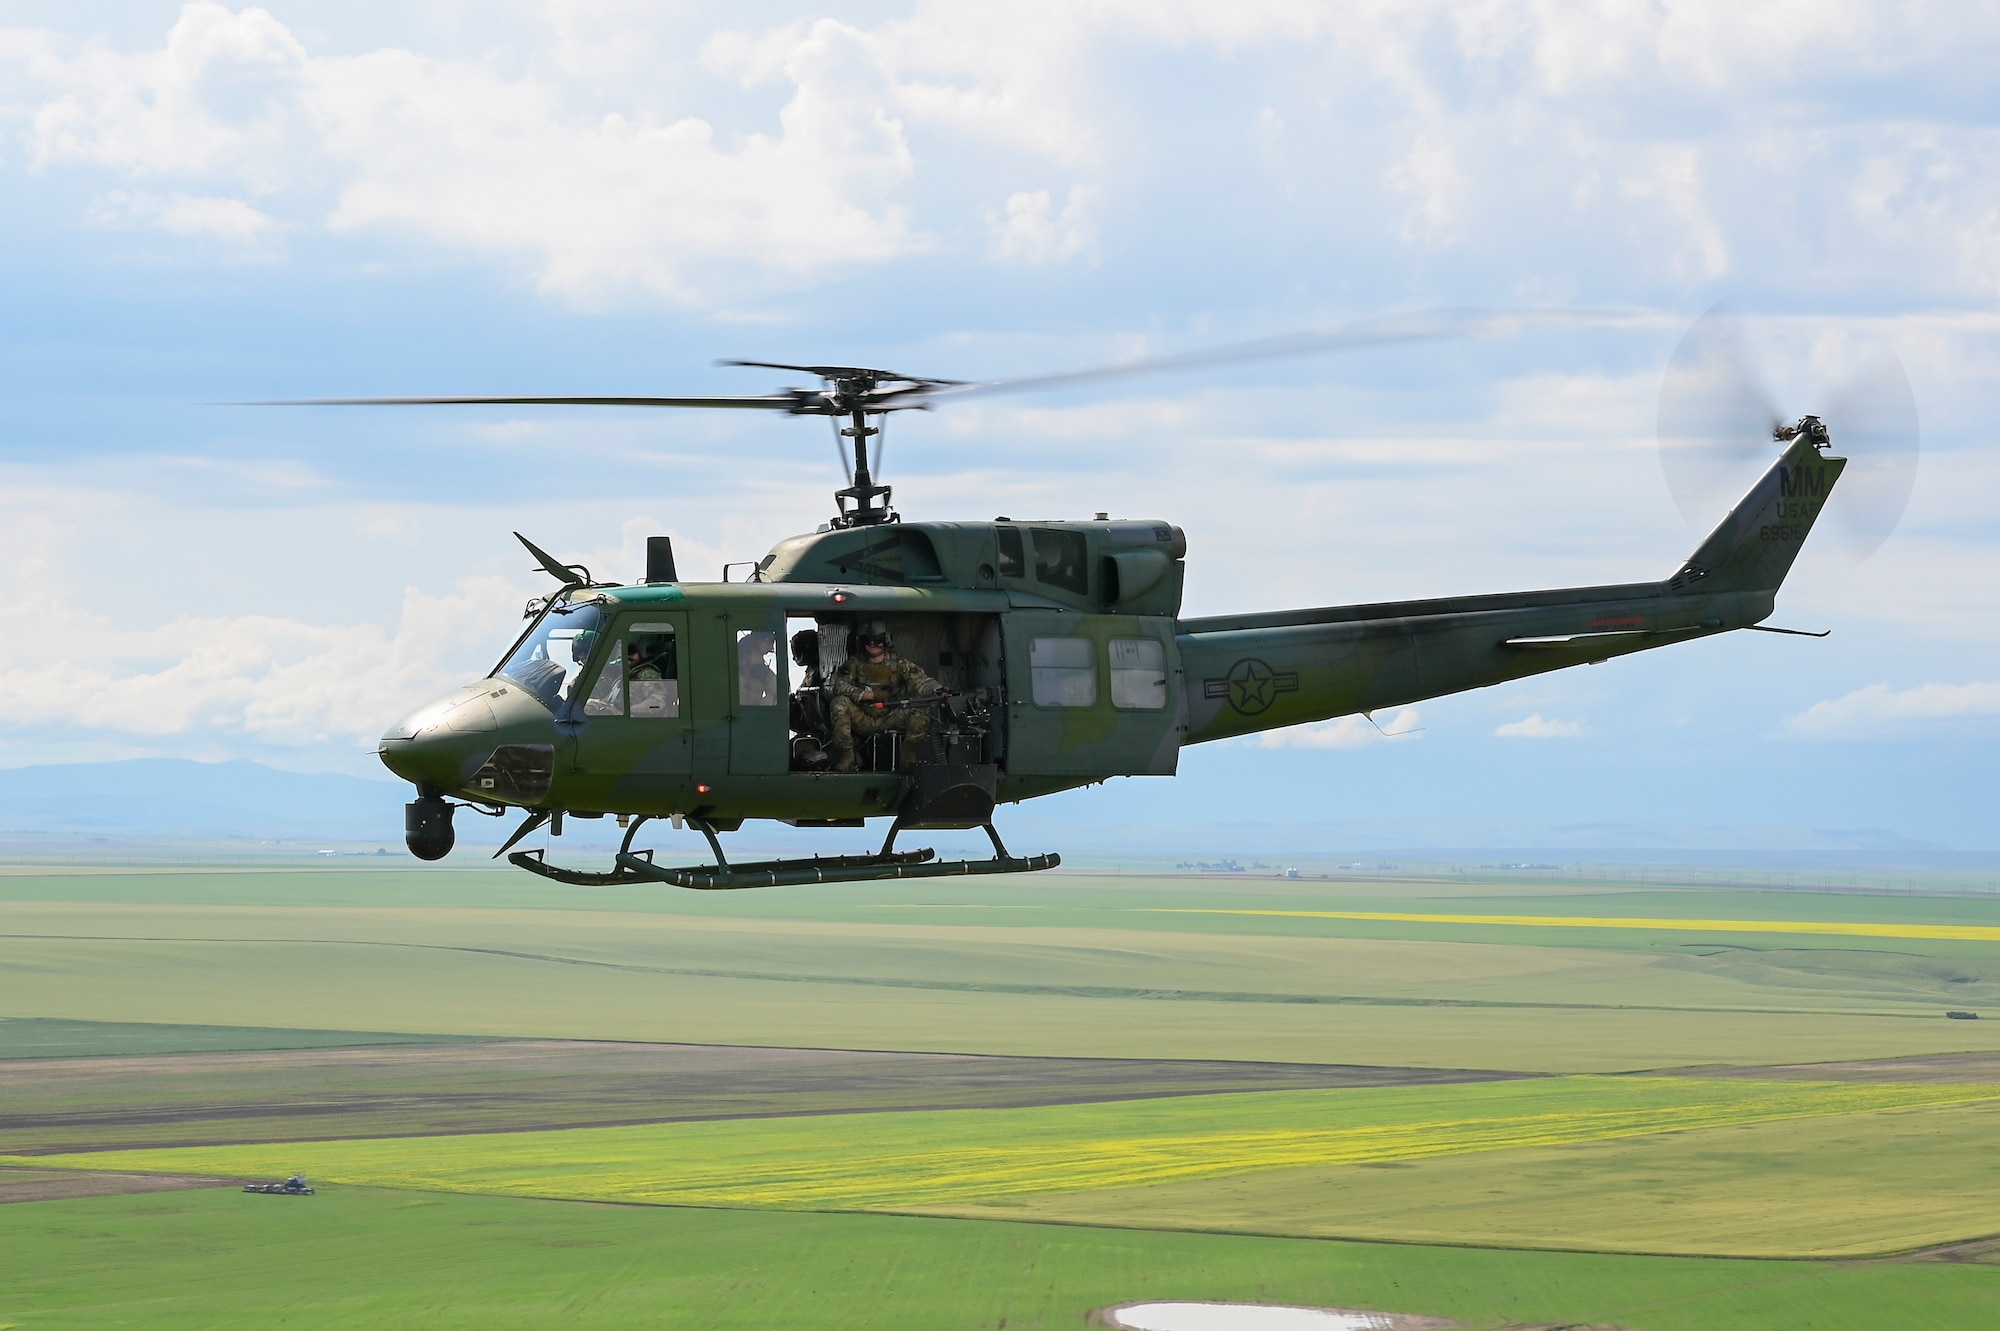 A UH-1N Huey from the 40th Helicopter Squadron flies by during a demonstration with Terry Kroeger, vice-chairman for the Strategic Command Consultation Committee at Malmstrom Air Force Base, Mont., June 28, 2023. The 40th HS ensures strategic security by providing flexible, rapid-response helicopter airlift support to the 341st Missile Wing. (U.S. Air Force photo by Airman 1st Class Breanna Christopher Volkmar)